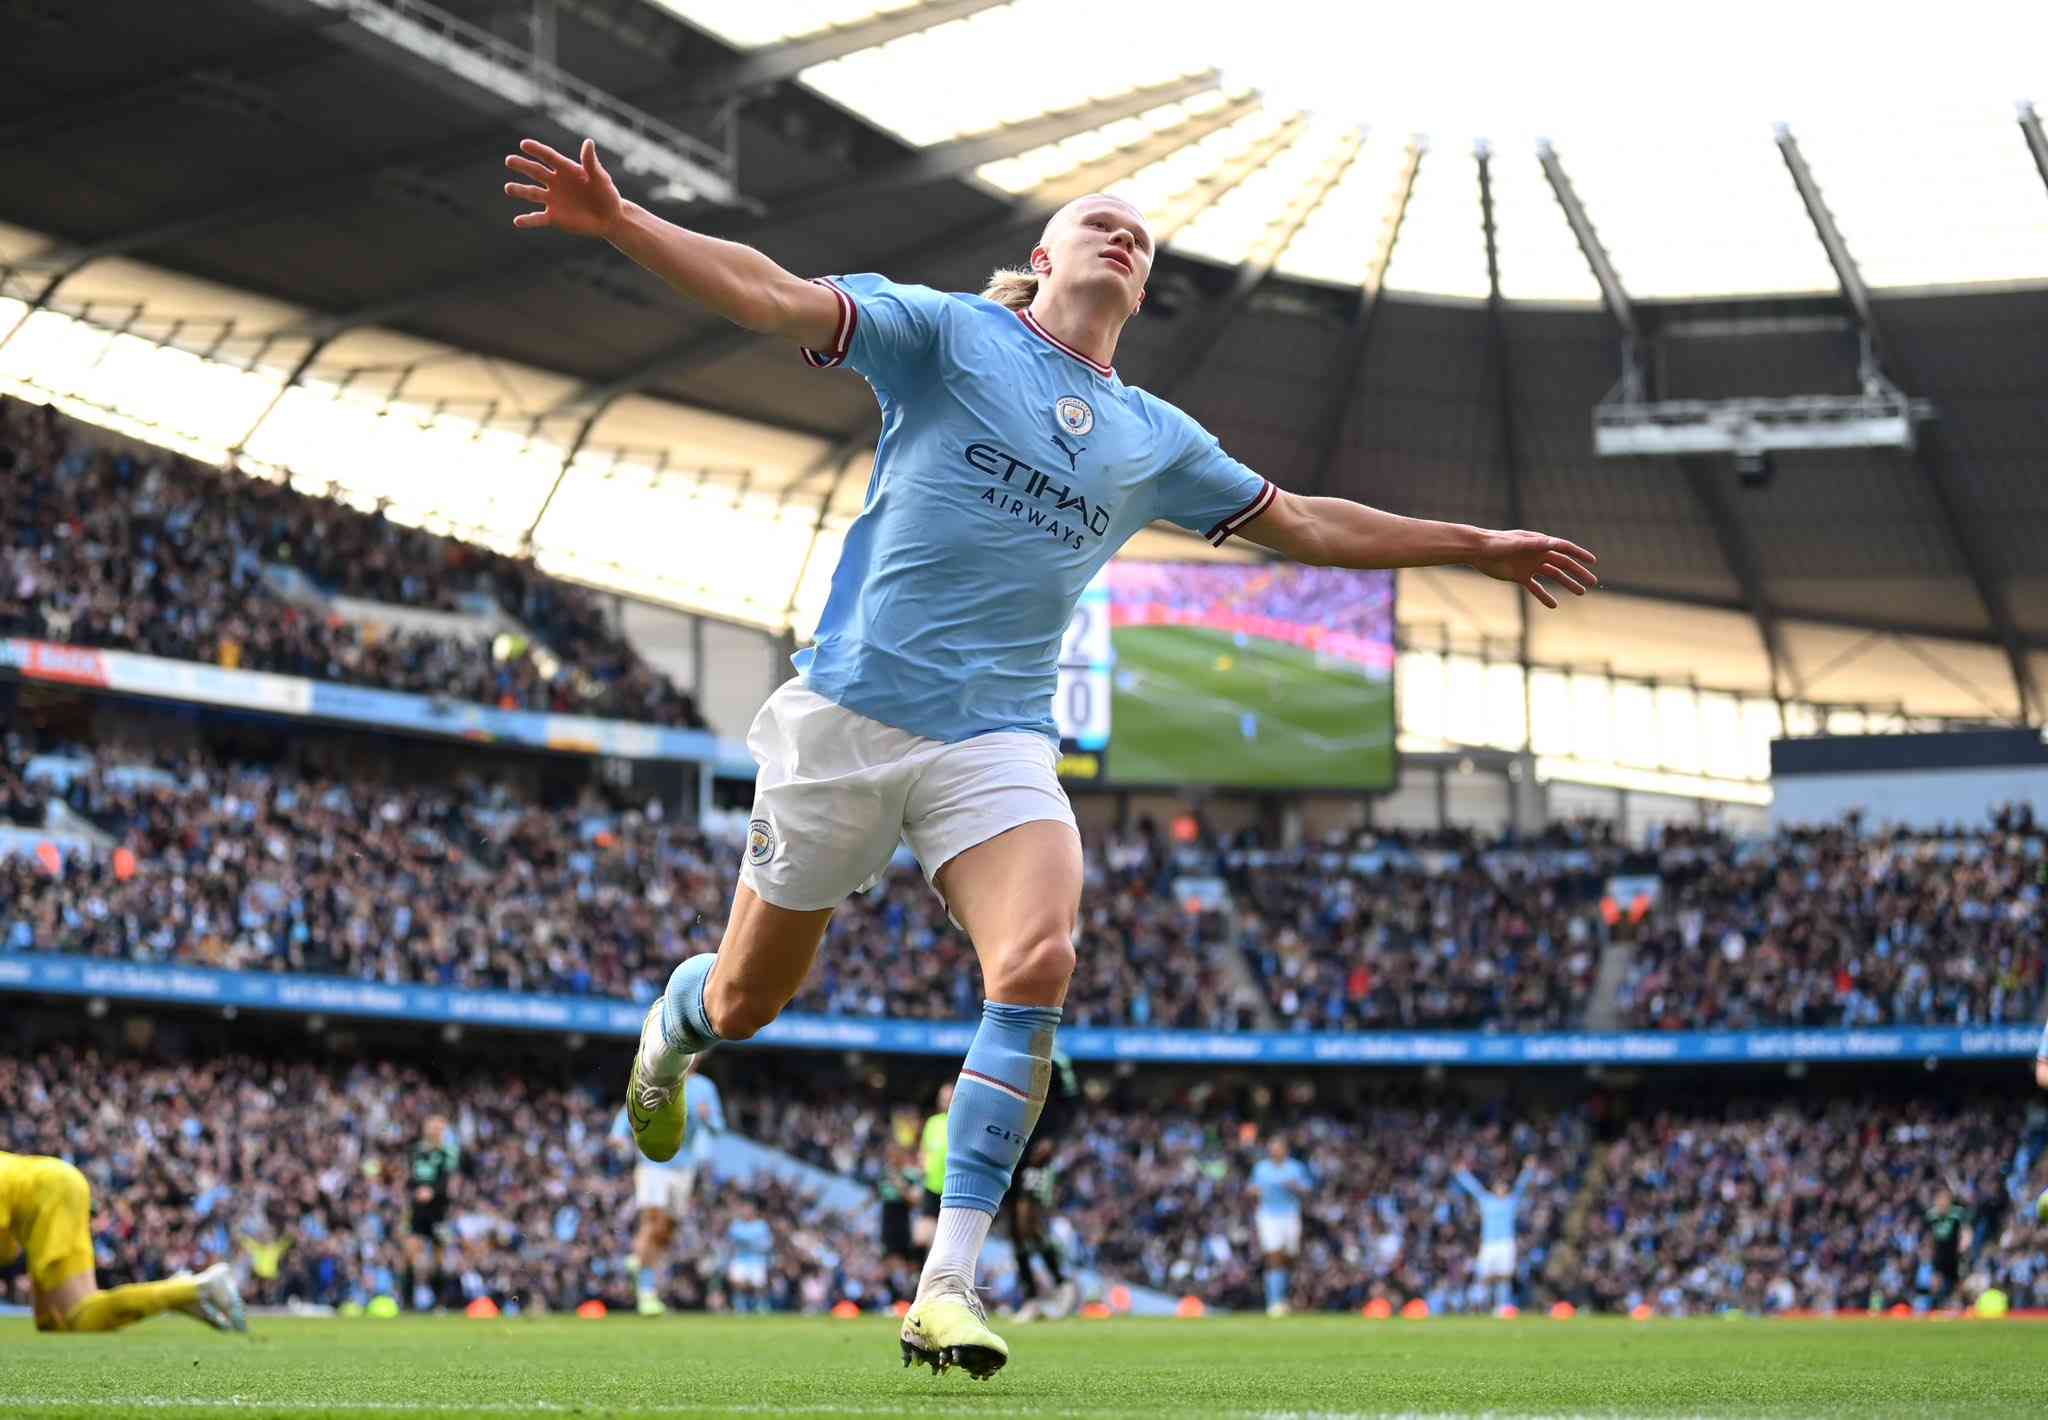 Haaland ties EPL scoring record as City beats Leicester 3-1